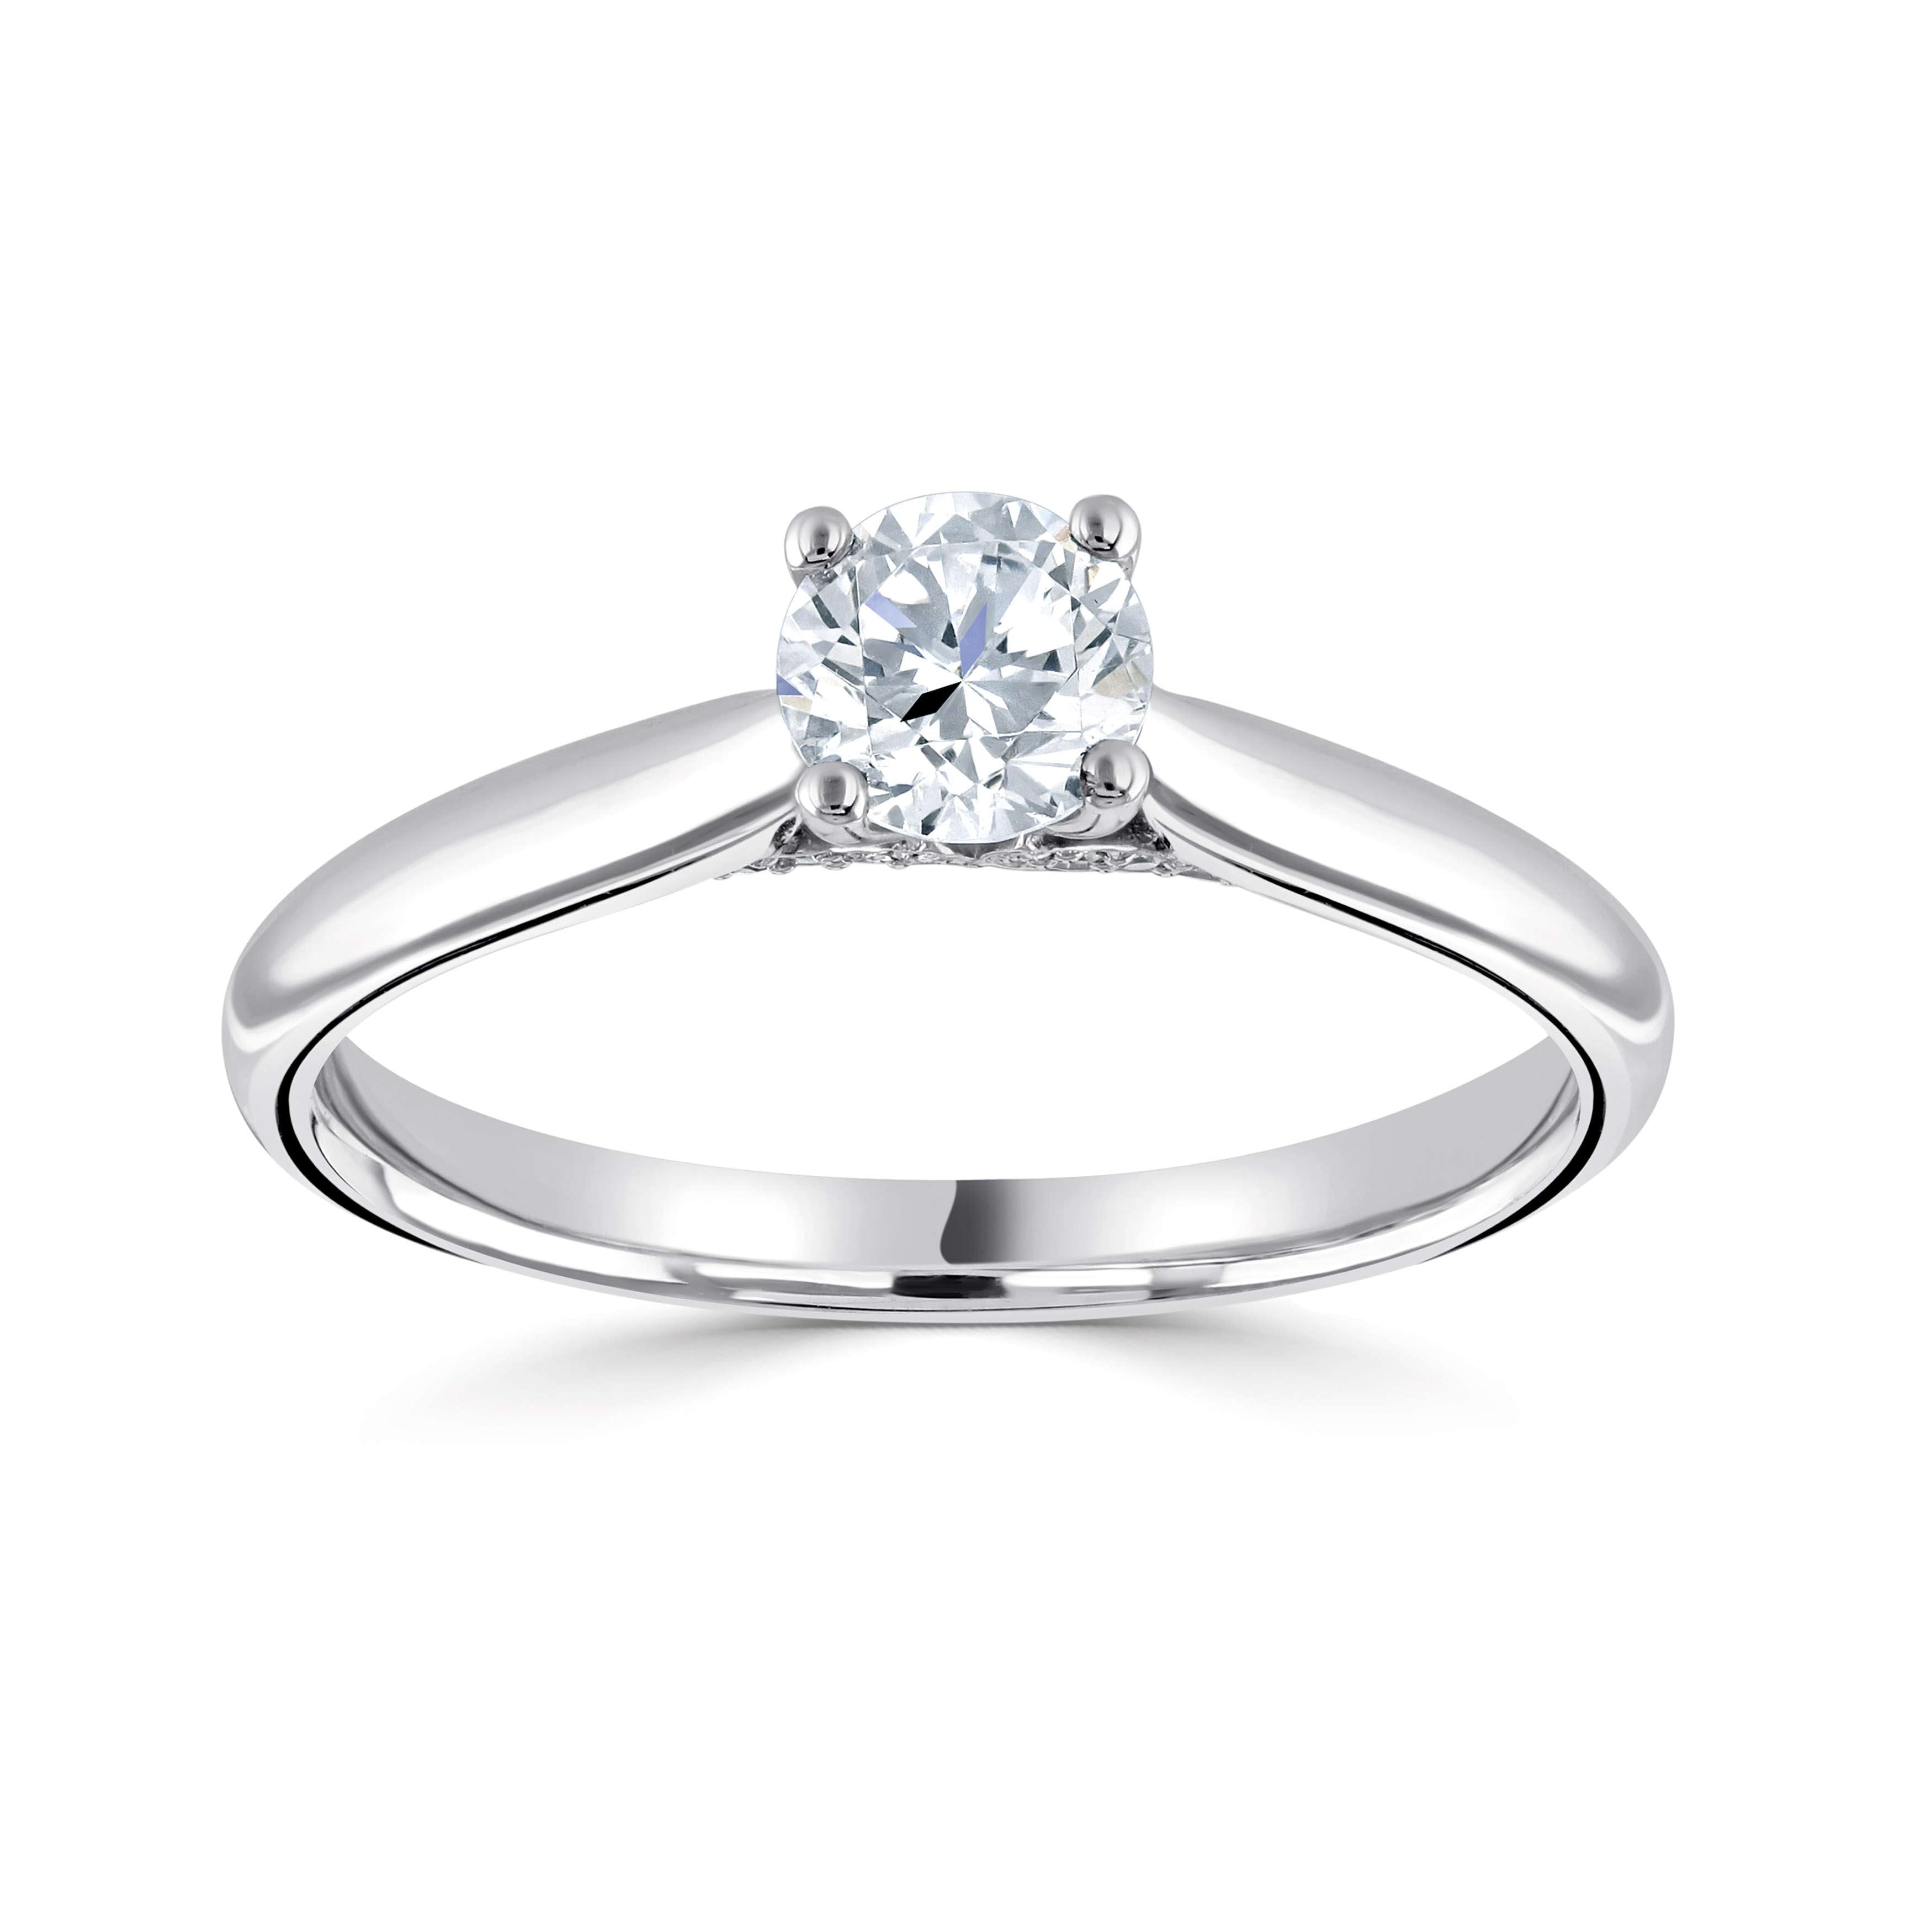 Allie *Select a Round Diamond 0.25ct or above